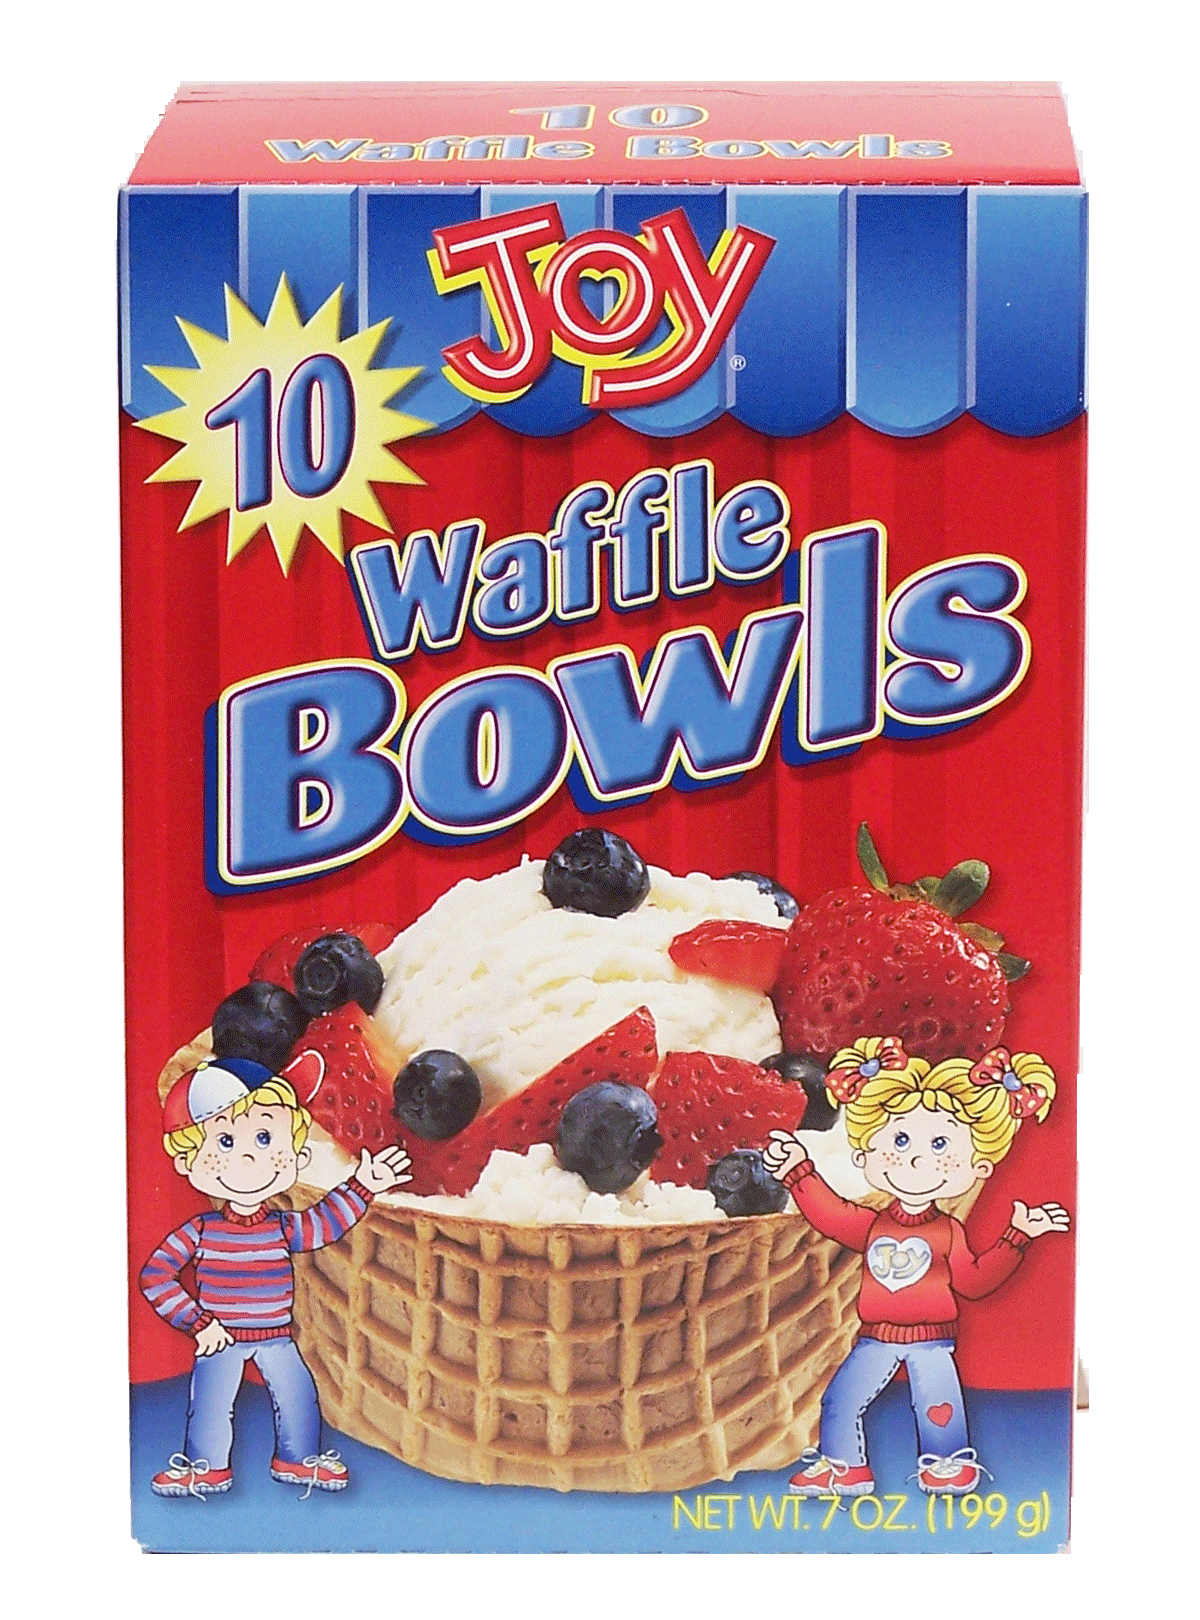 Joy  waffle ice cream bowls, 10-count Full-Size Picture